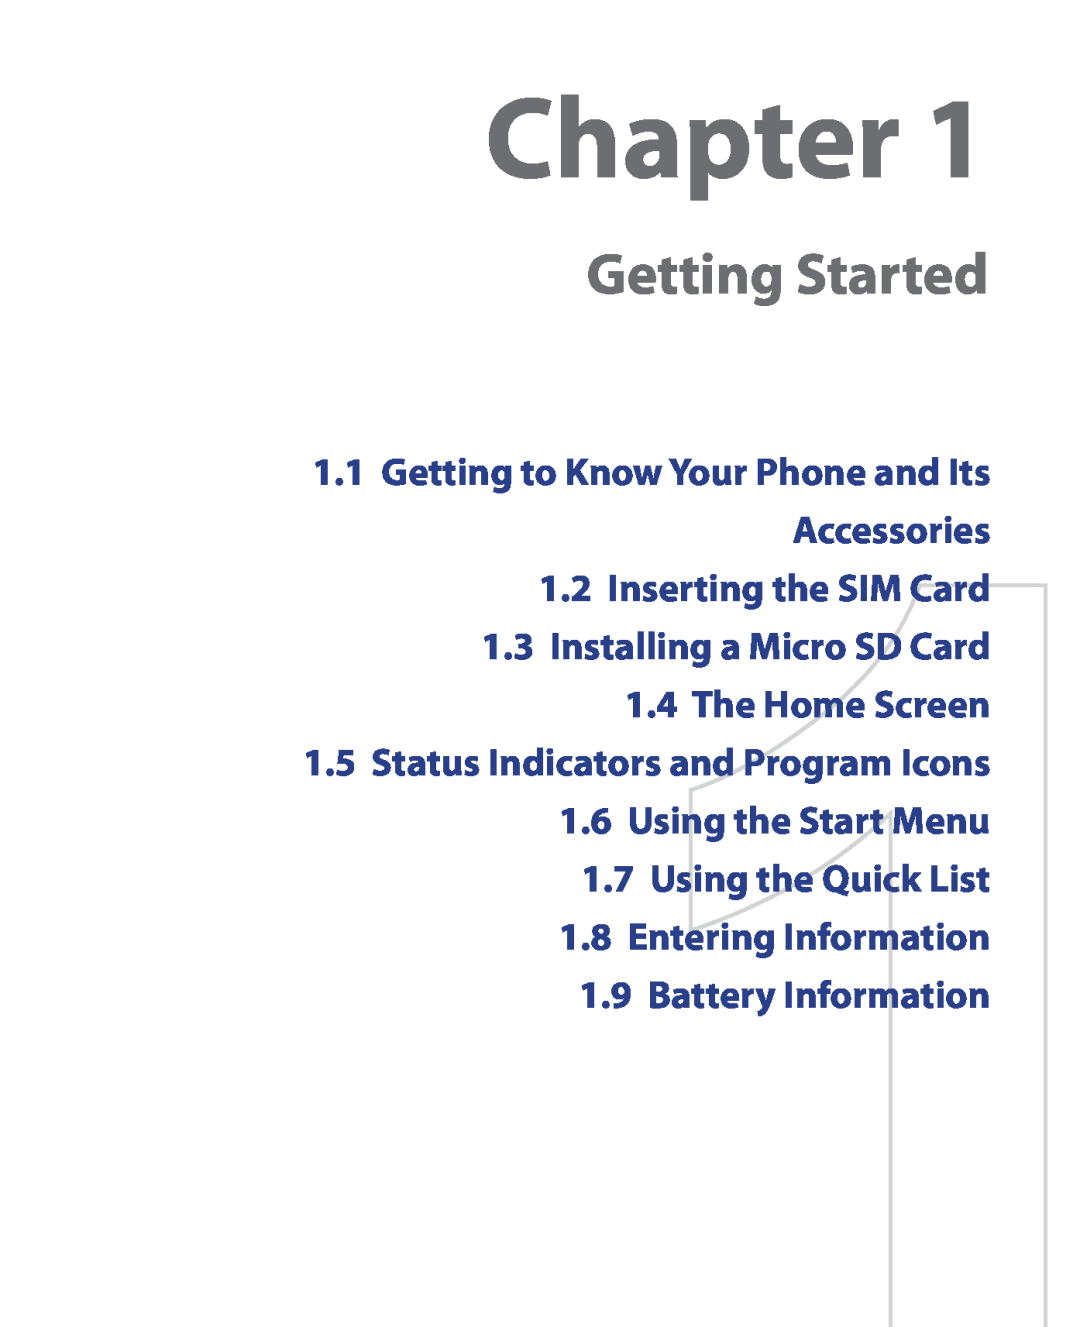 HTC HTC S621 user manual Chapter, Getting Started, Inserting the SIM Card 1.3 Installing a Micro SD Card 